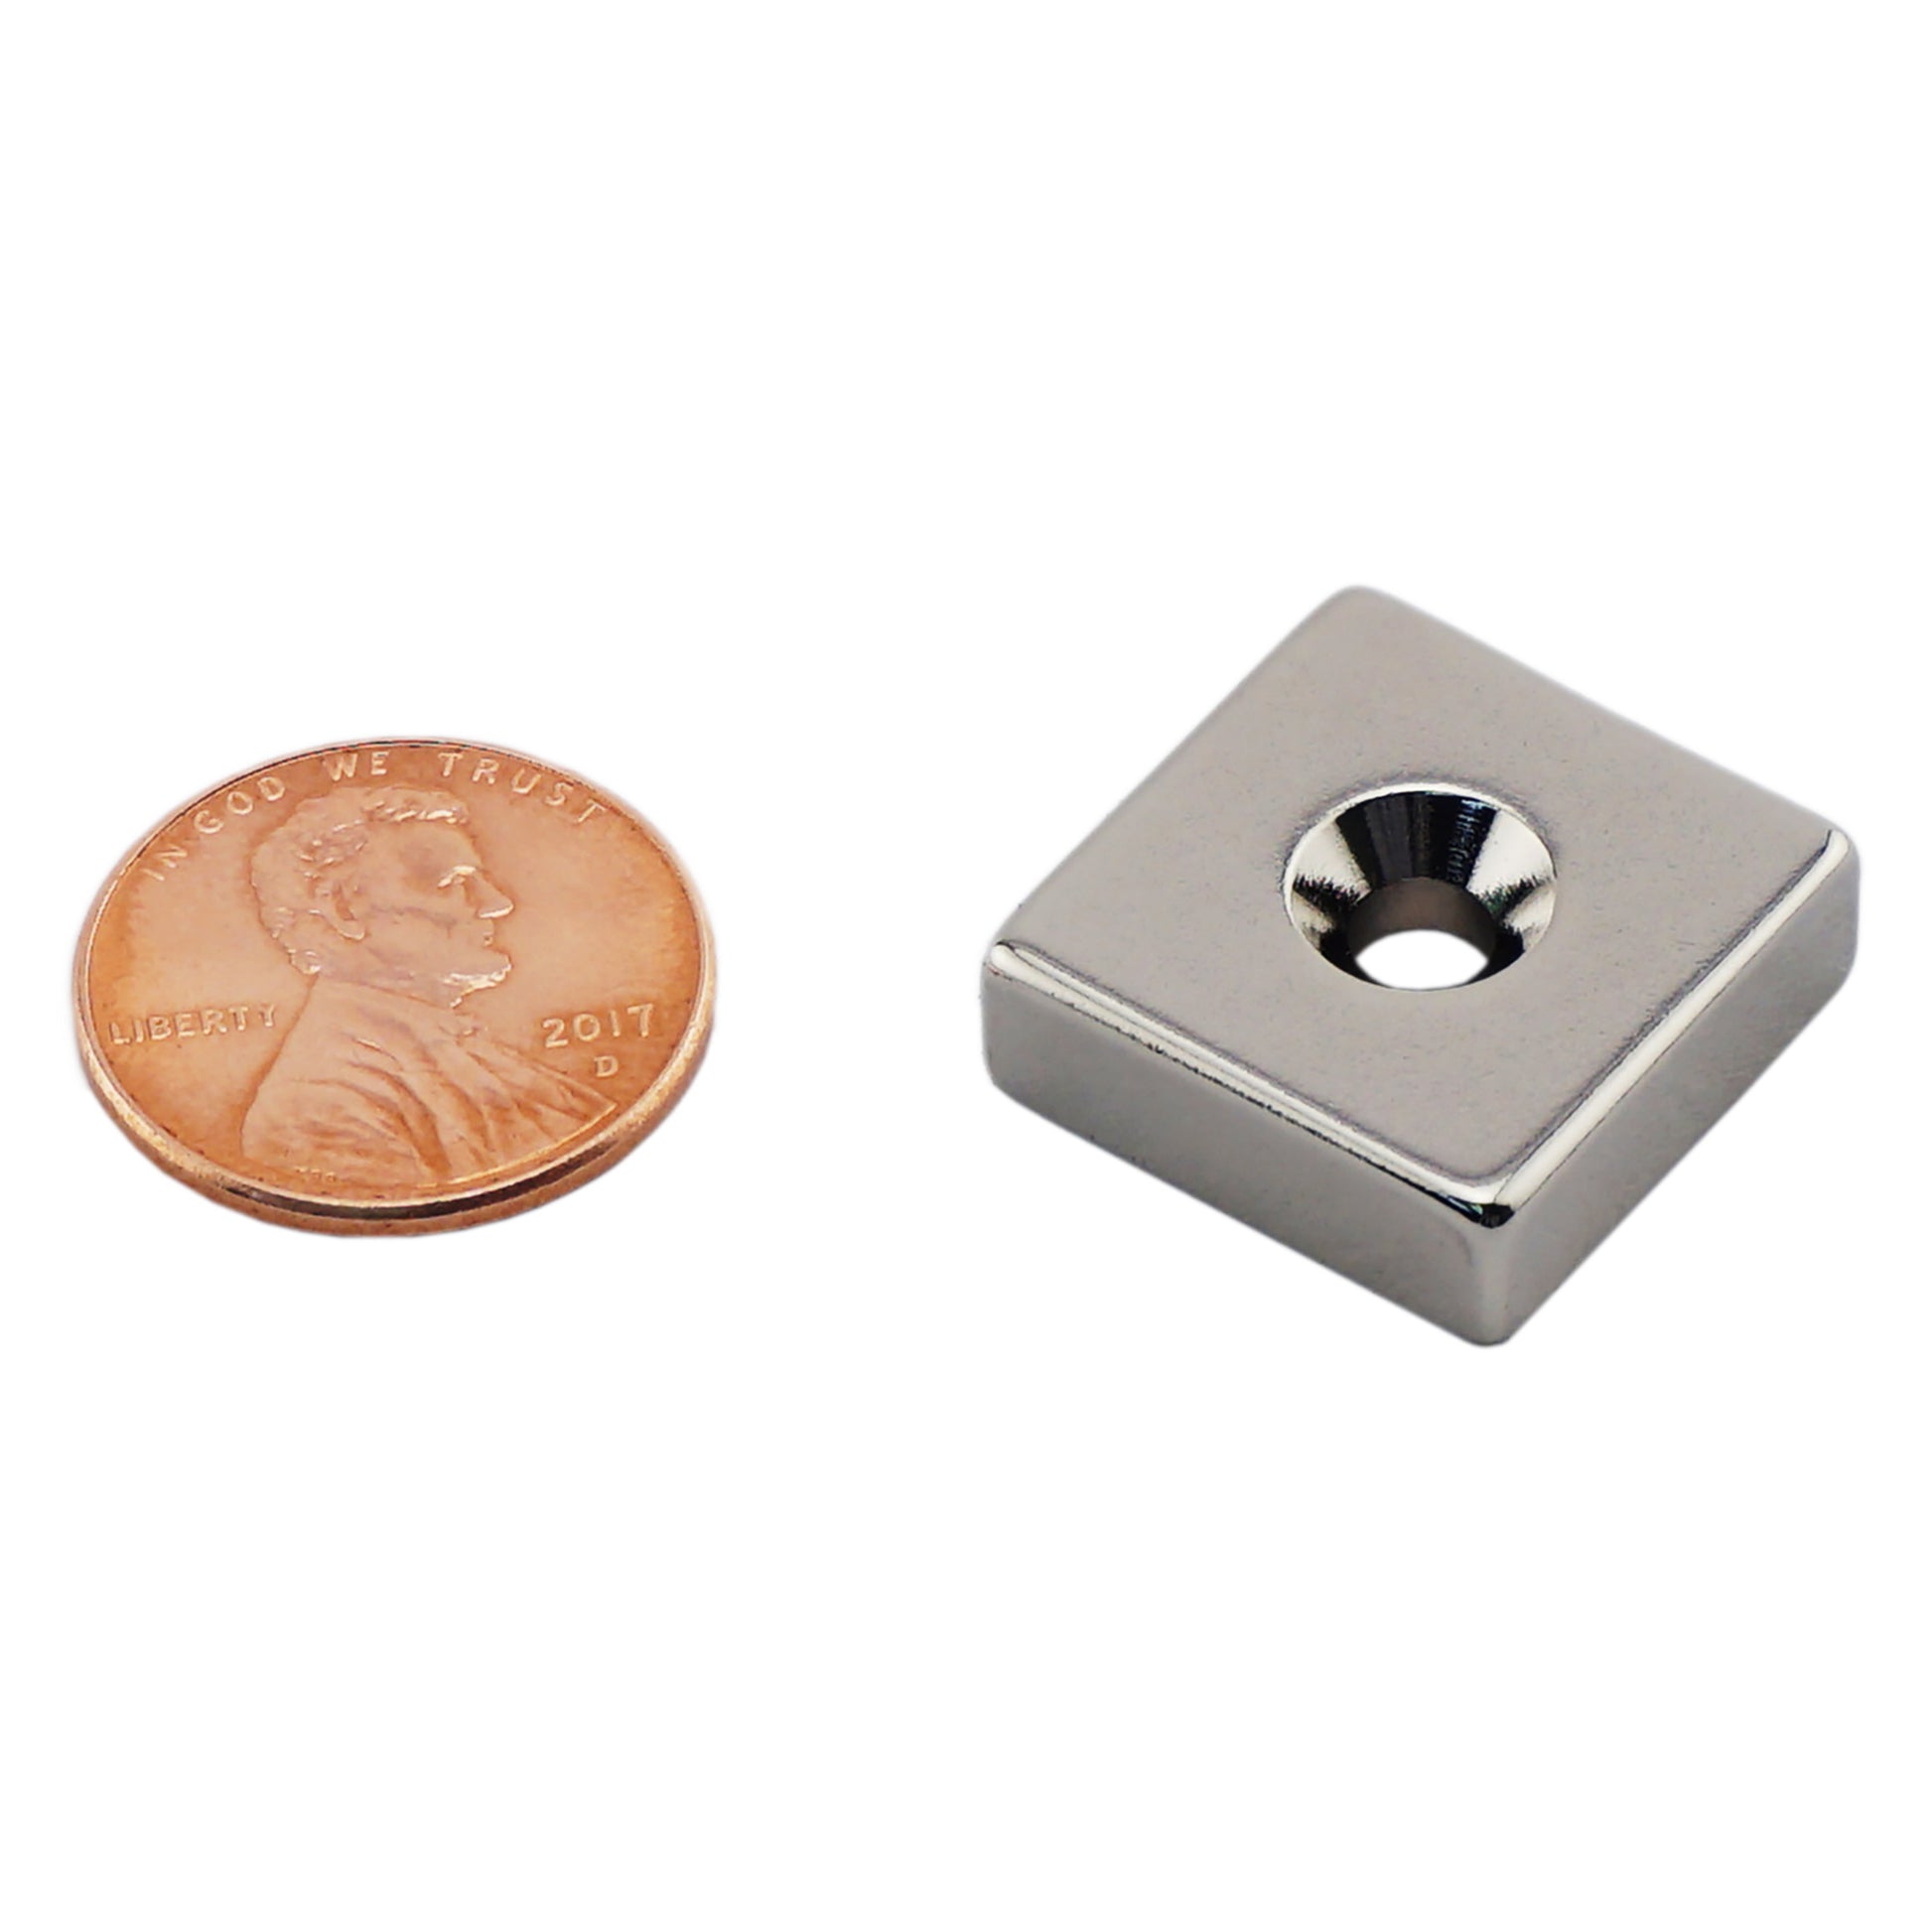 Load image into Gallery viewer, NB002553NCTS Neodymium Countersunk Block Magnet - Compared to Penny for Size Reference